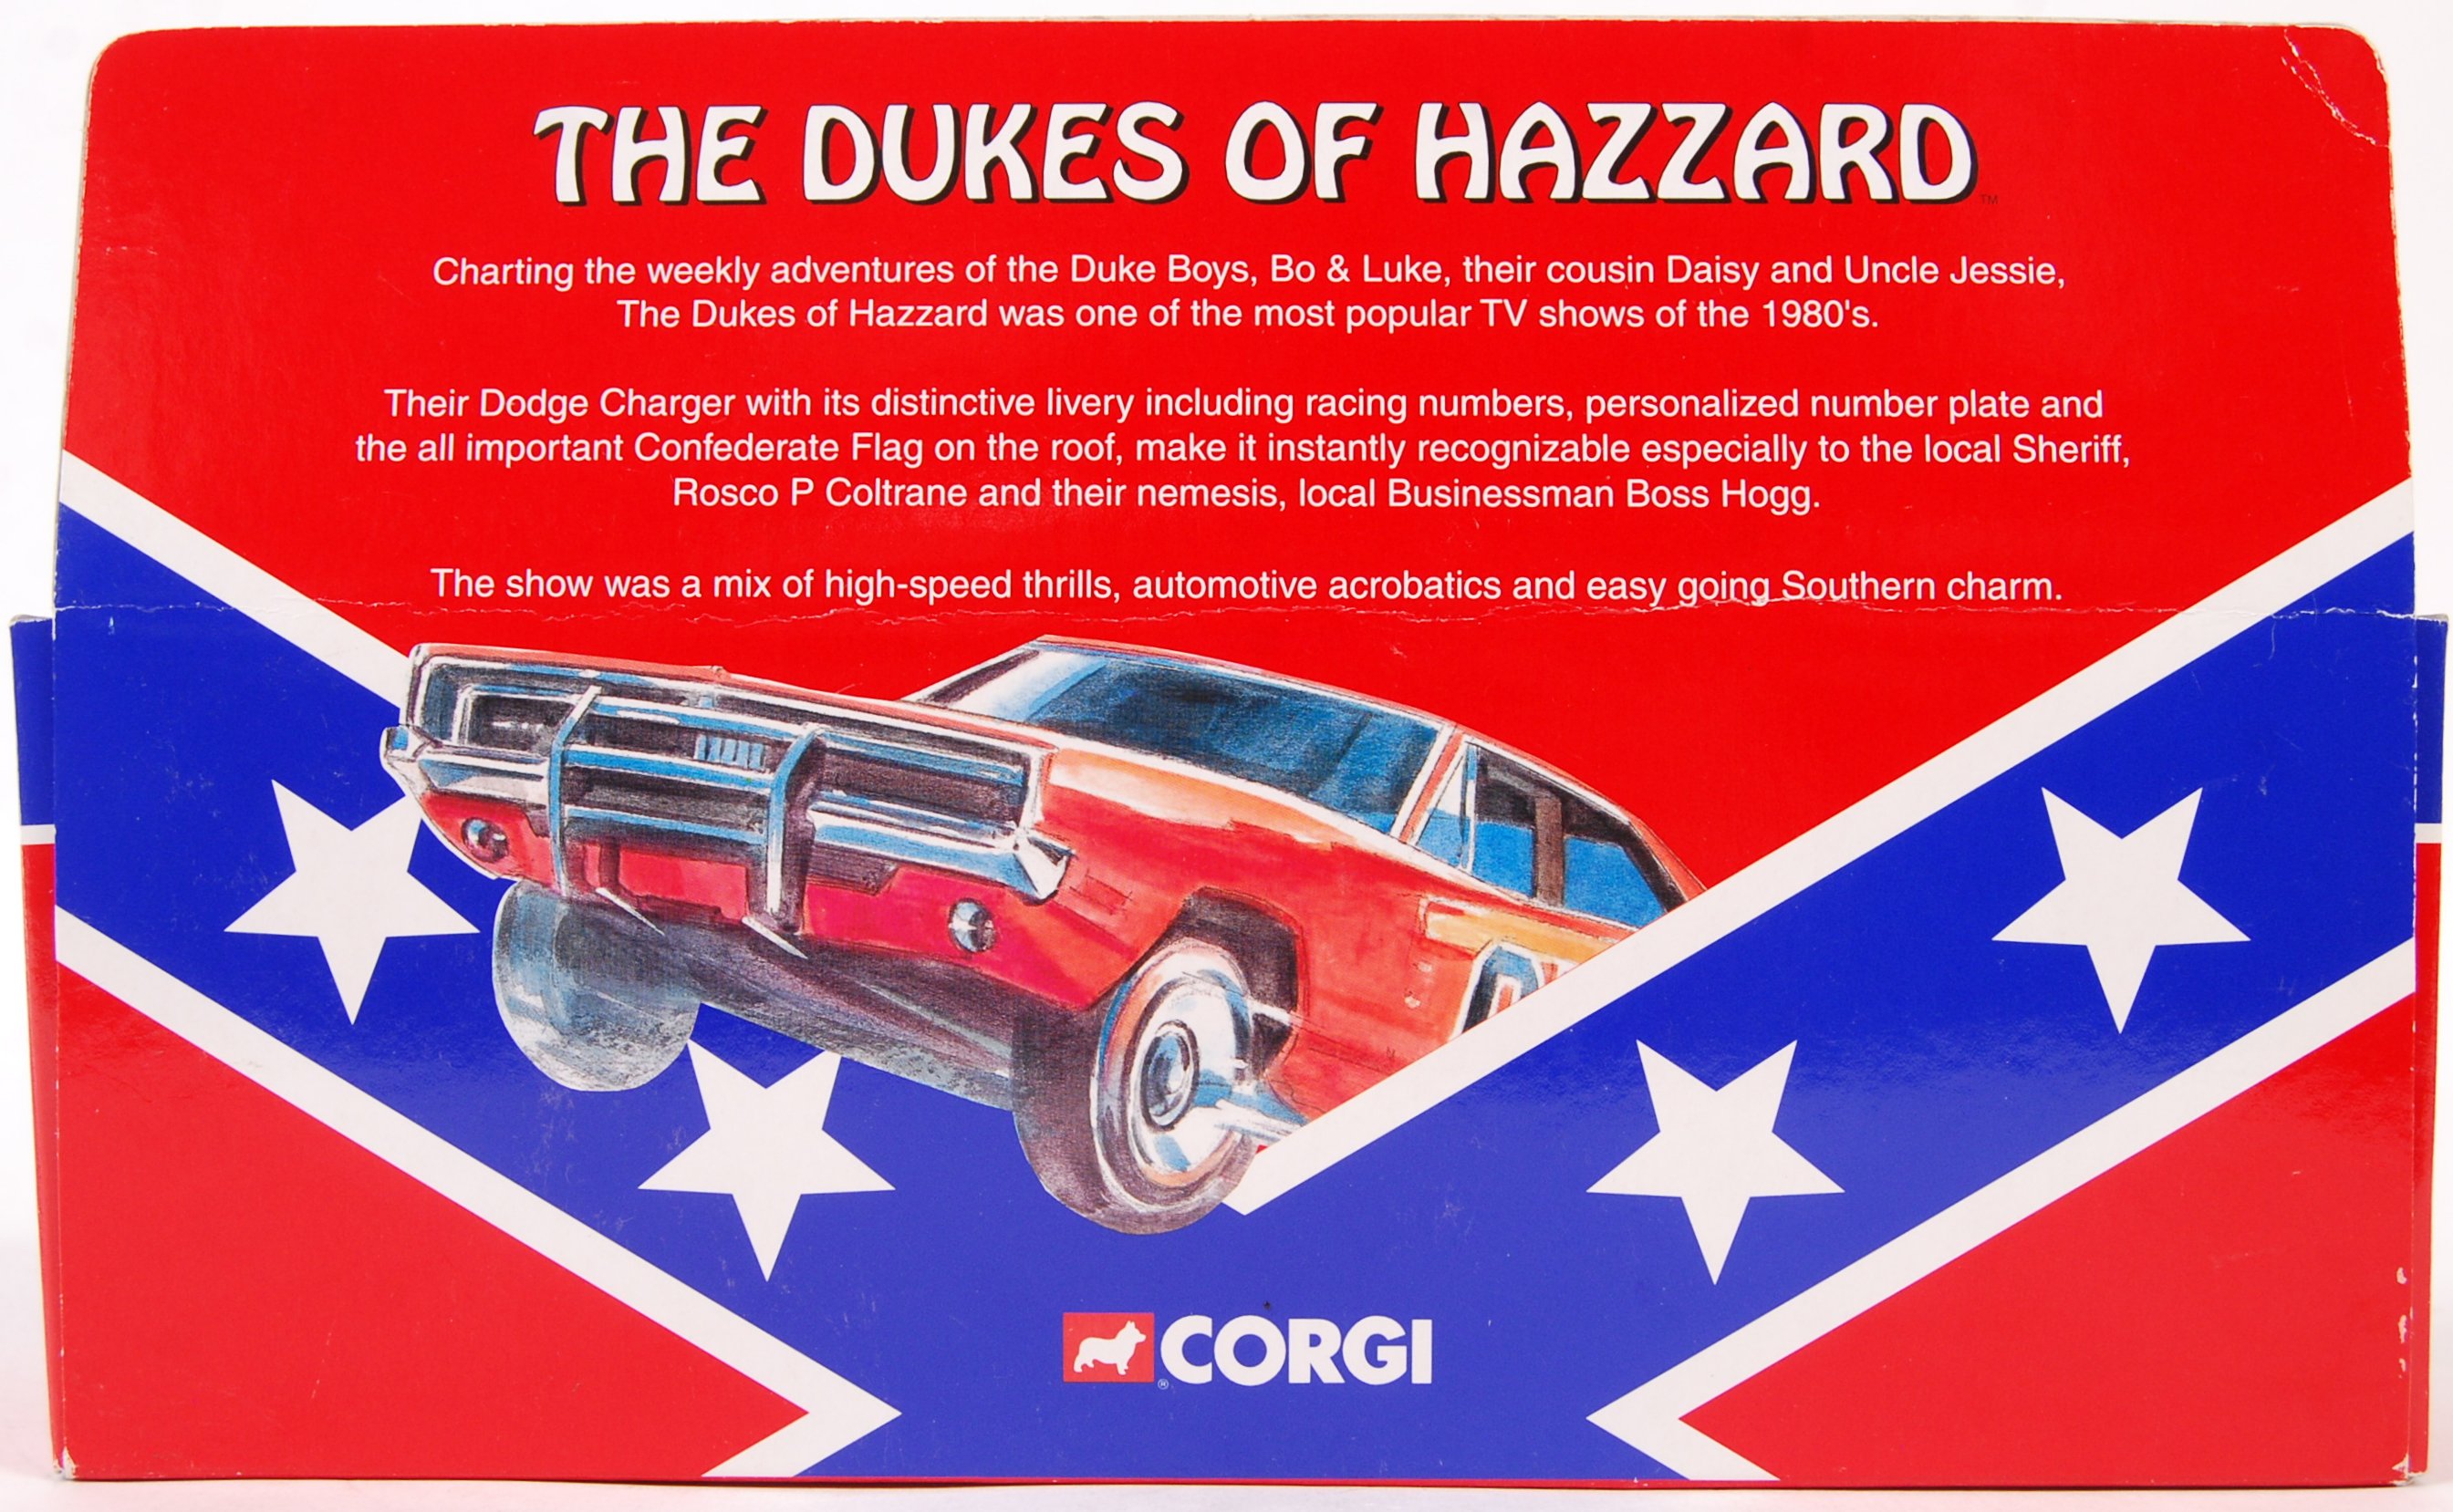 CORGI THE DUKES OF HAZZARD DODGE CHARGER AND FIGURES SET - Image 4 of 4